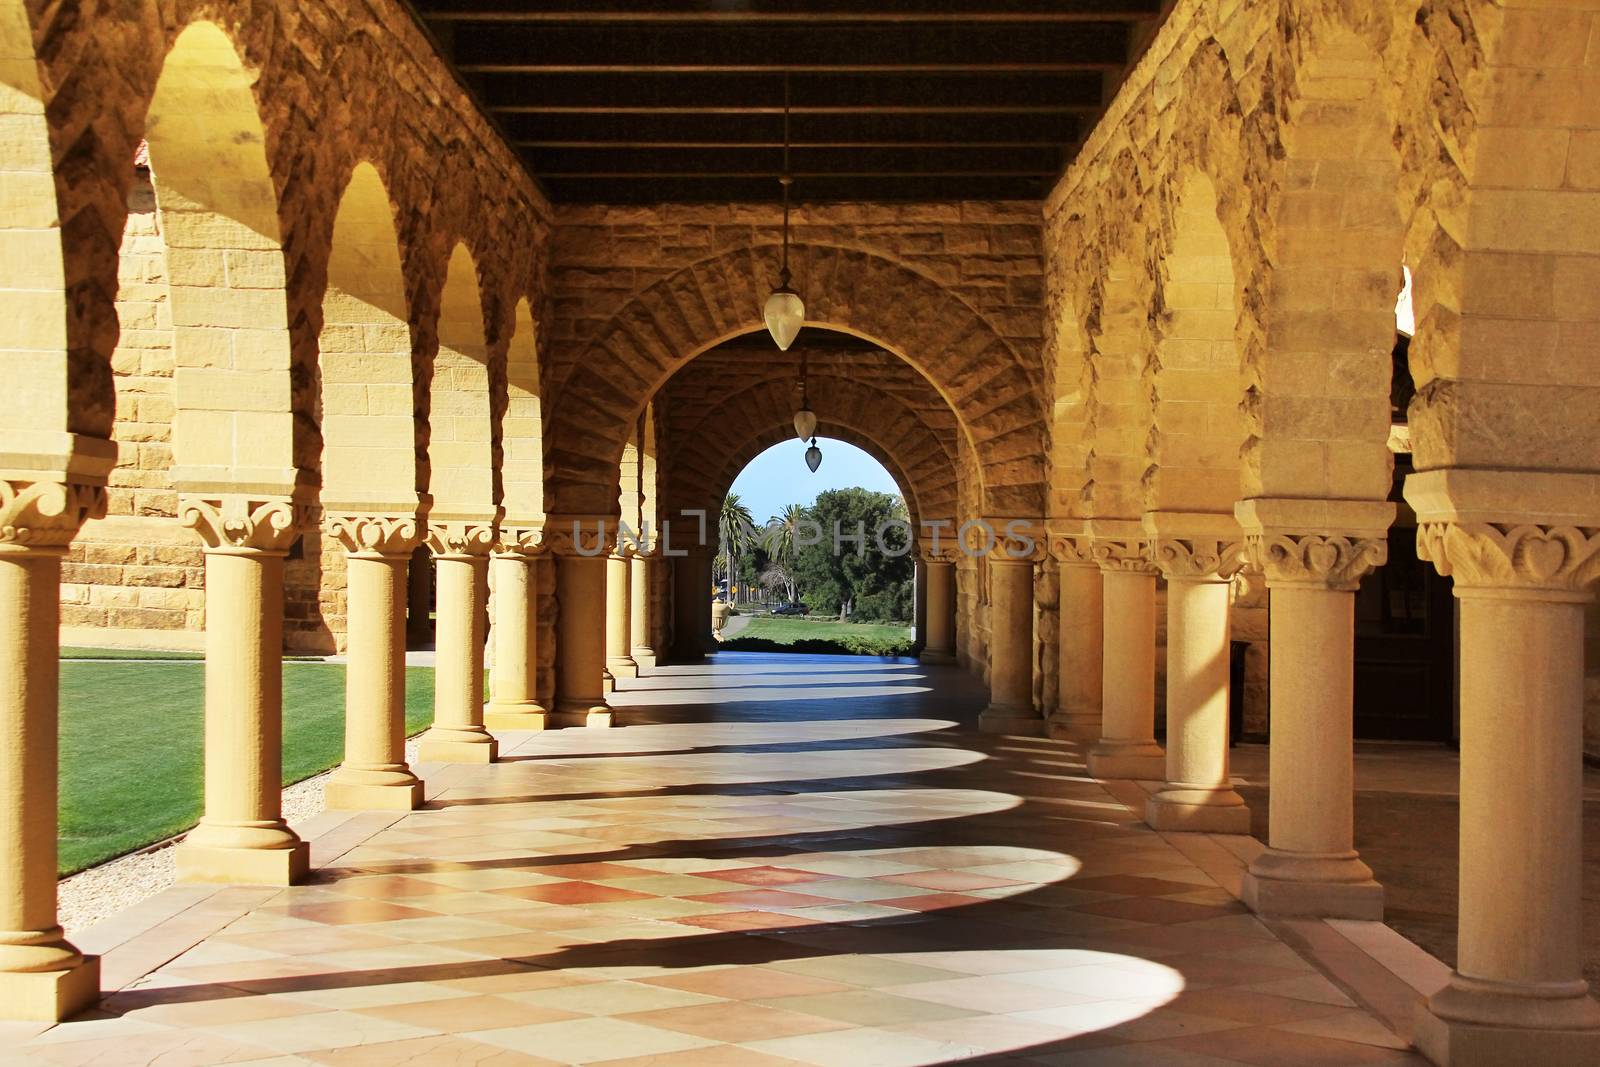 Stanford University California at late afternoon. Palo Alto